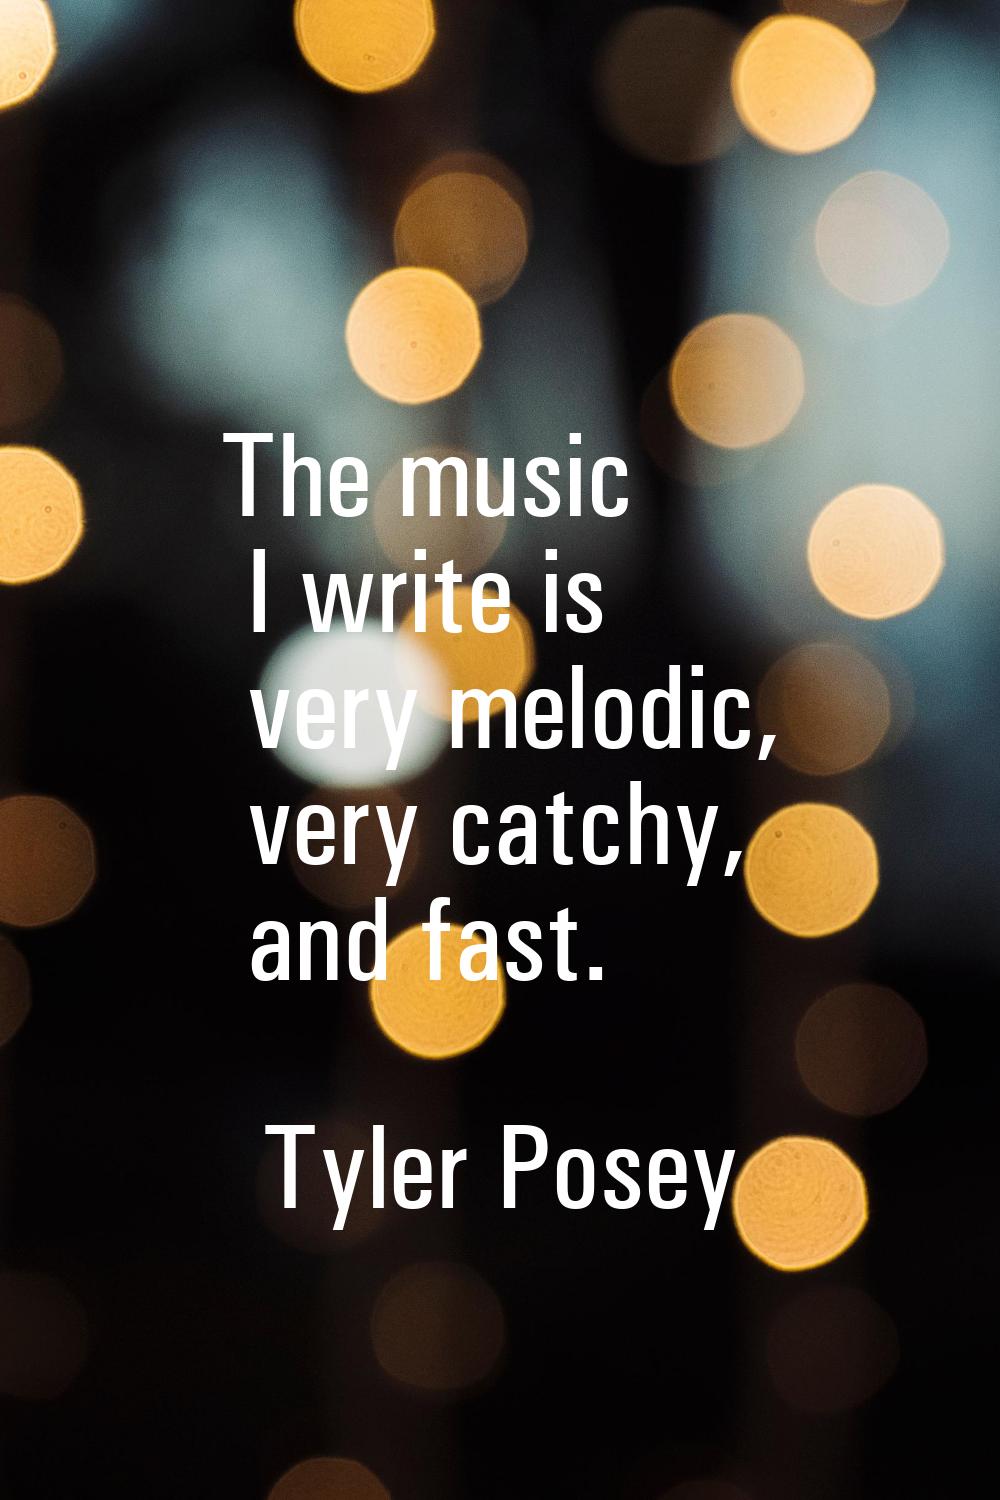 The music I write is very melodic, very catchy, and fast.